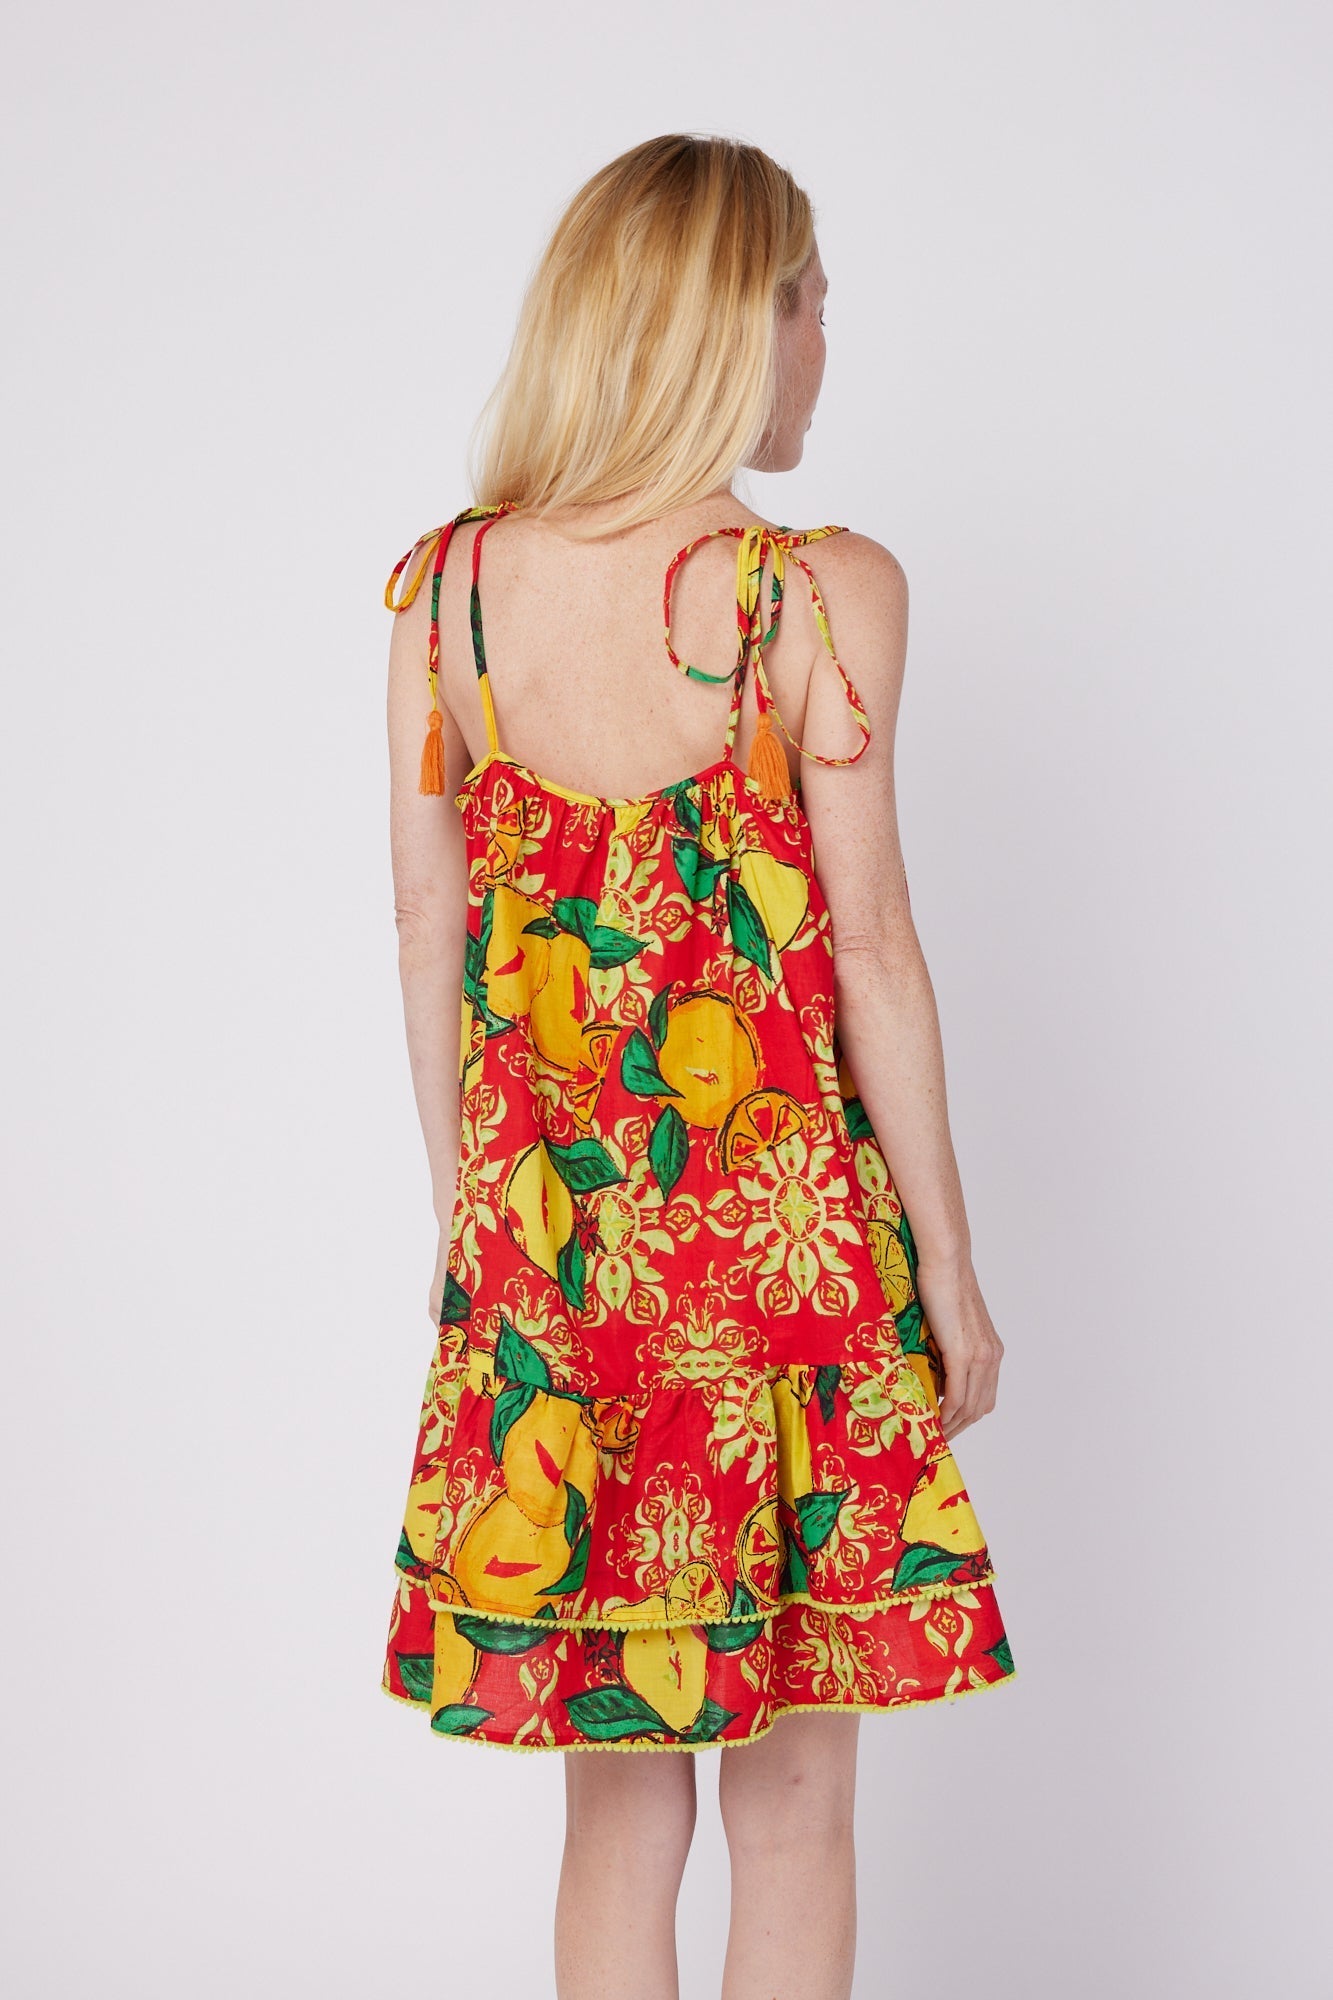 ModaPosa Tonia Sleeveless Spaghetti Strap Ruffle Mini Dress with Pom Pom Trim in Red Citrus Majolica . Discover women's resort dresses and lifestyle clothing inspired by the Mediterranean. Free worldwide shipping available!